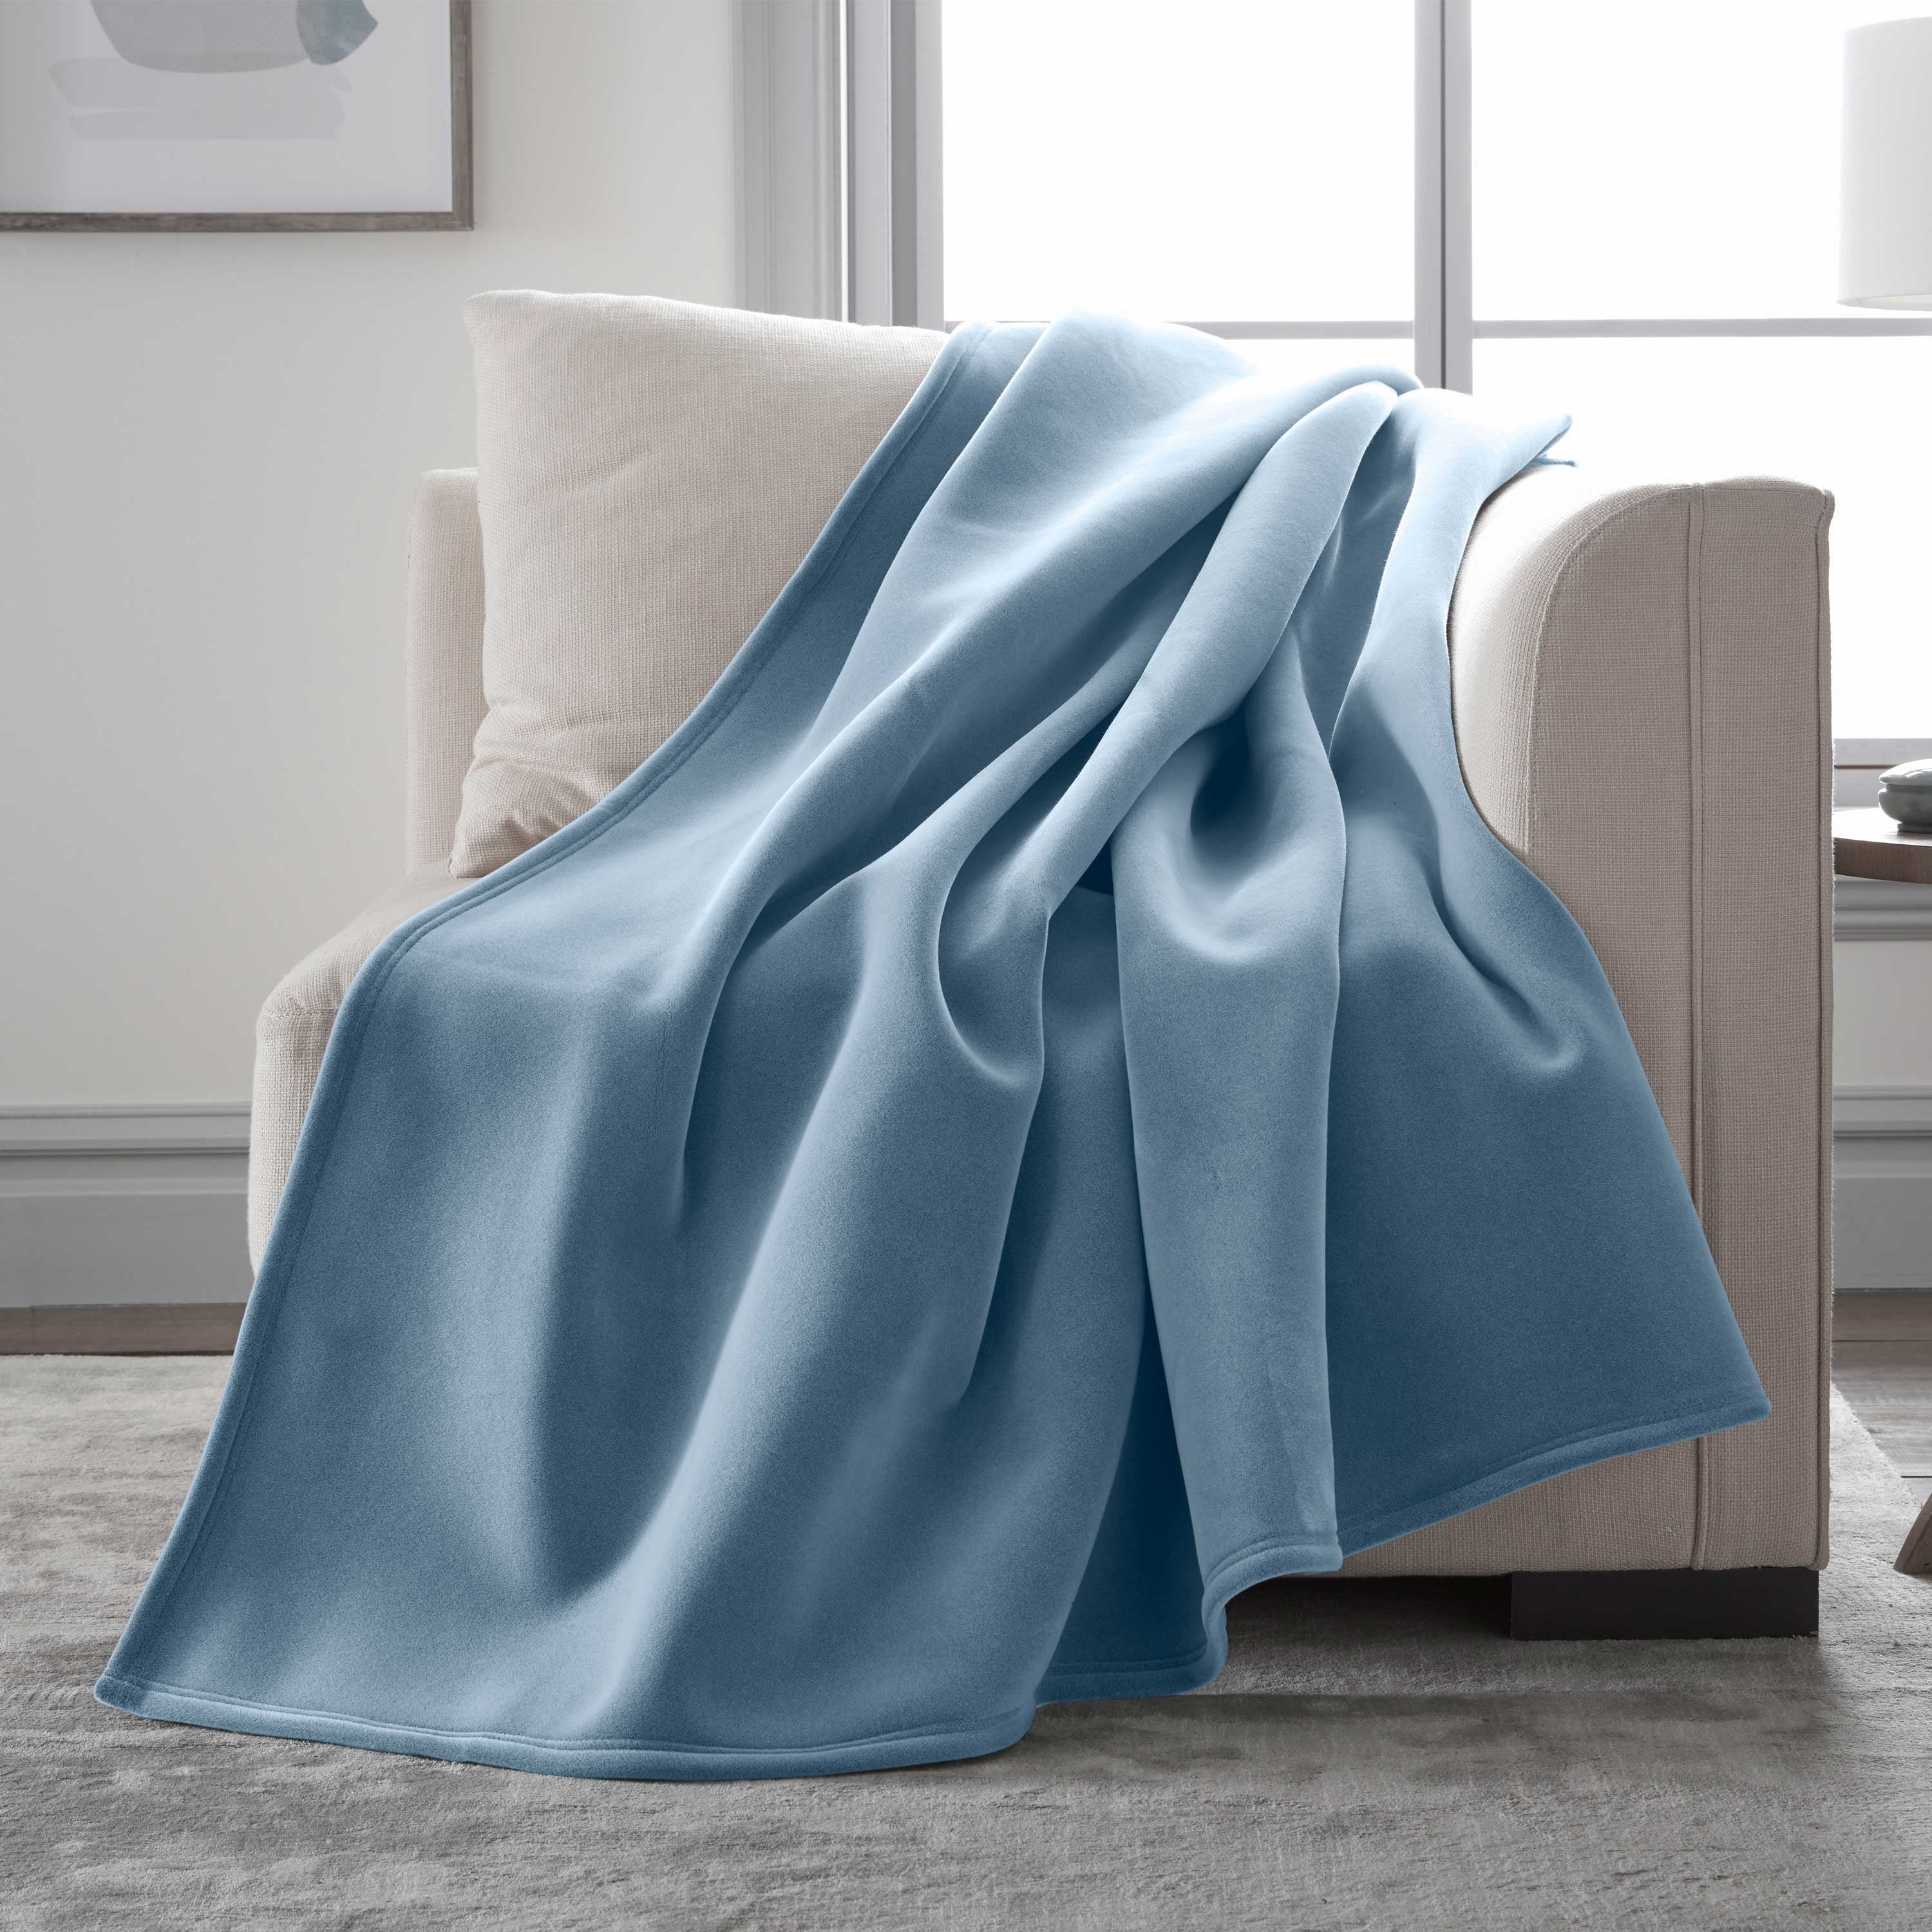 Warm Pet-Friendly Soft Insulated Home B Details about   The Original Vellux Blanket Twin 